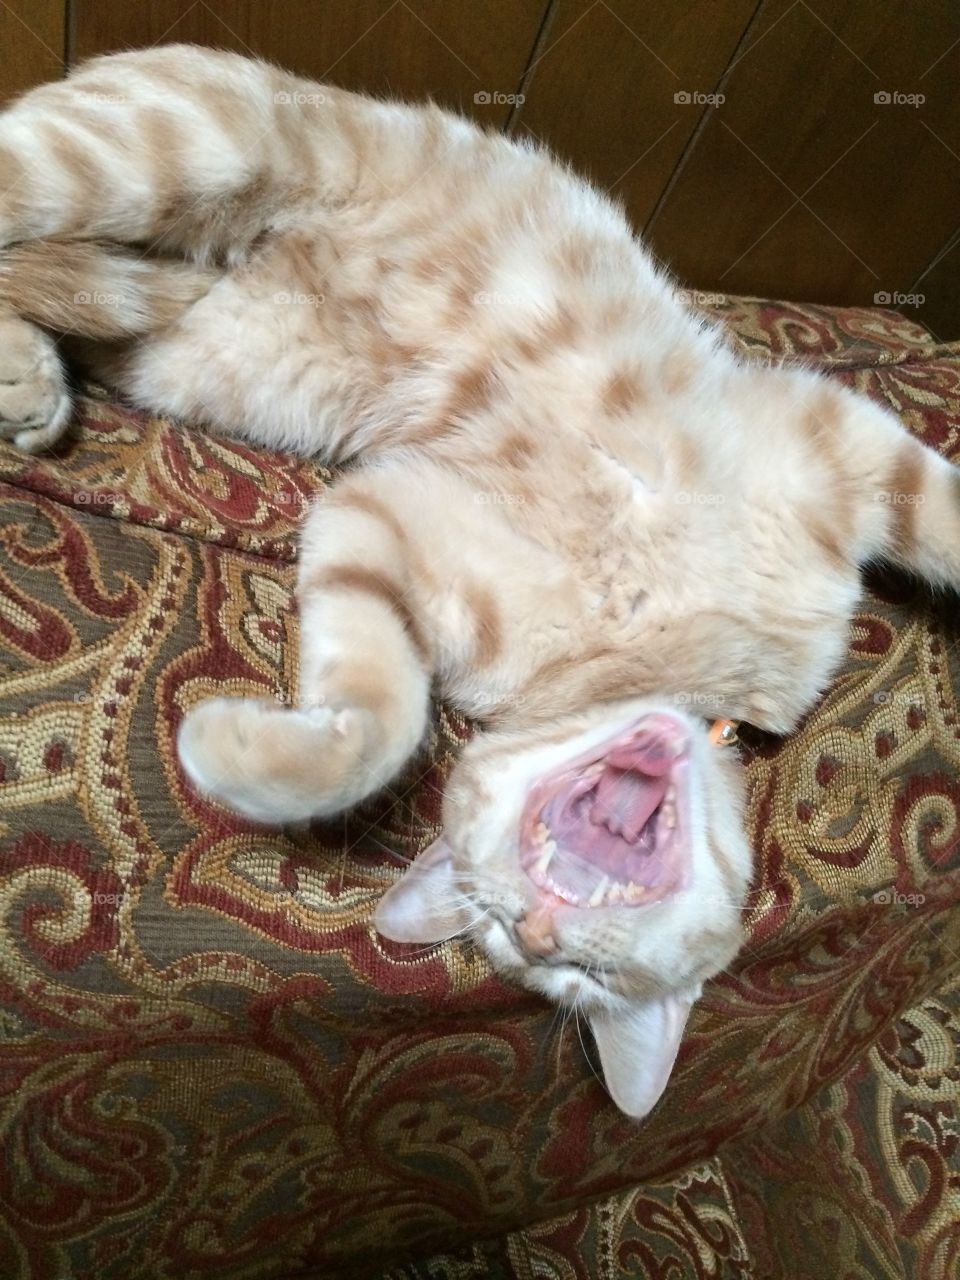 Cat meowing. Handsome orange tabby meowing while on his back